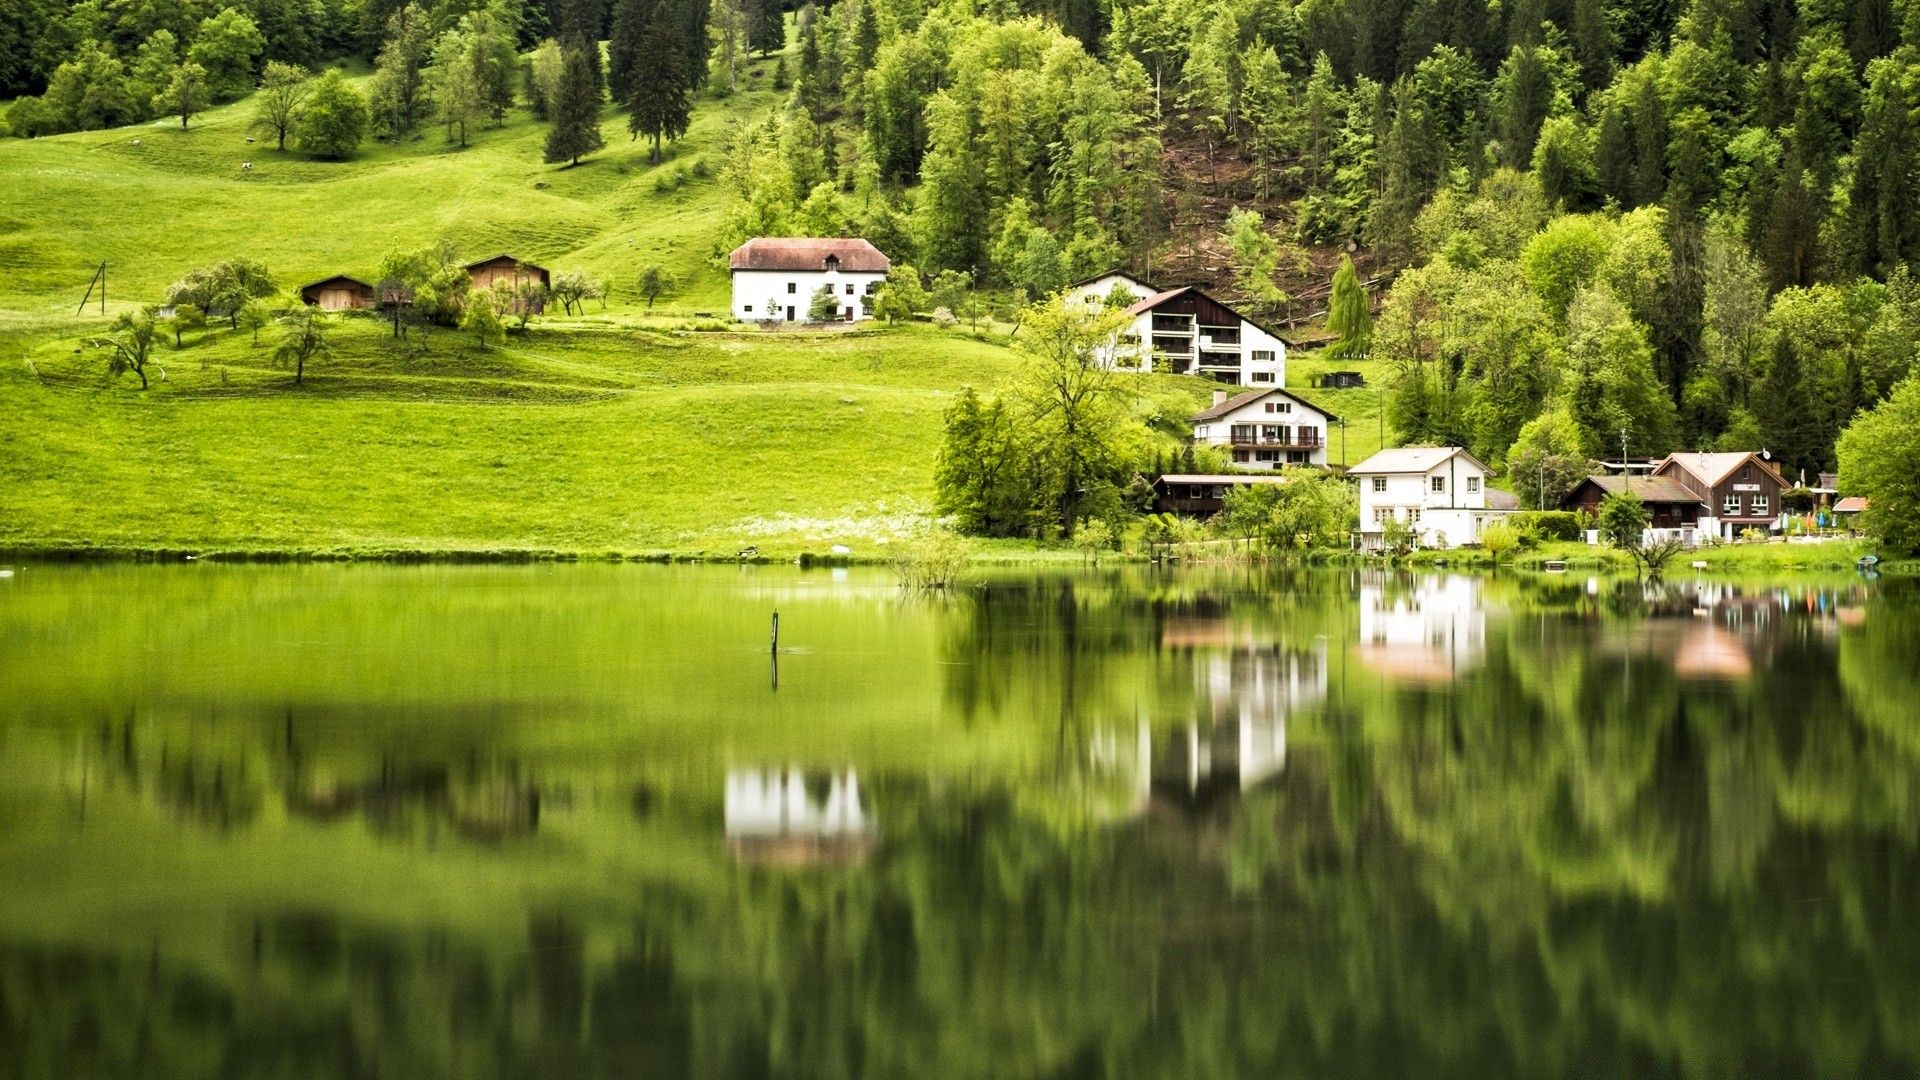 europe nature grass water landscape summer wood tree outdoors rural house lake hayfield travel river reflection sky